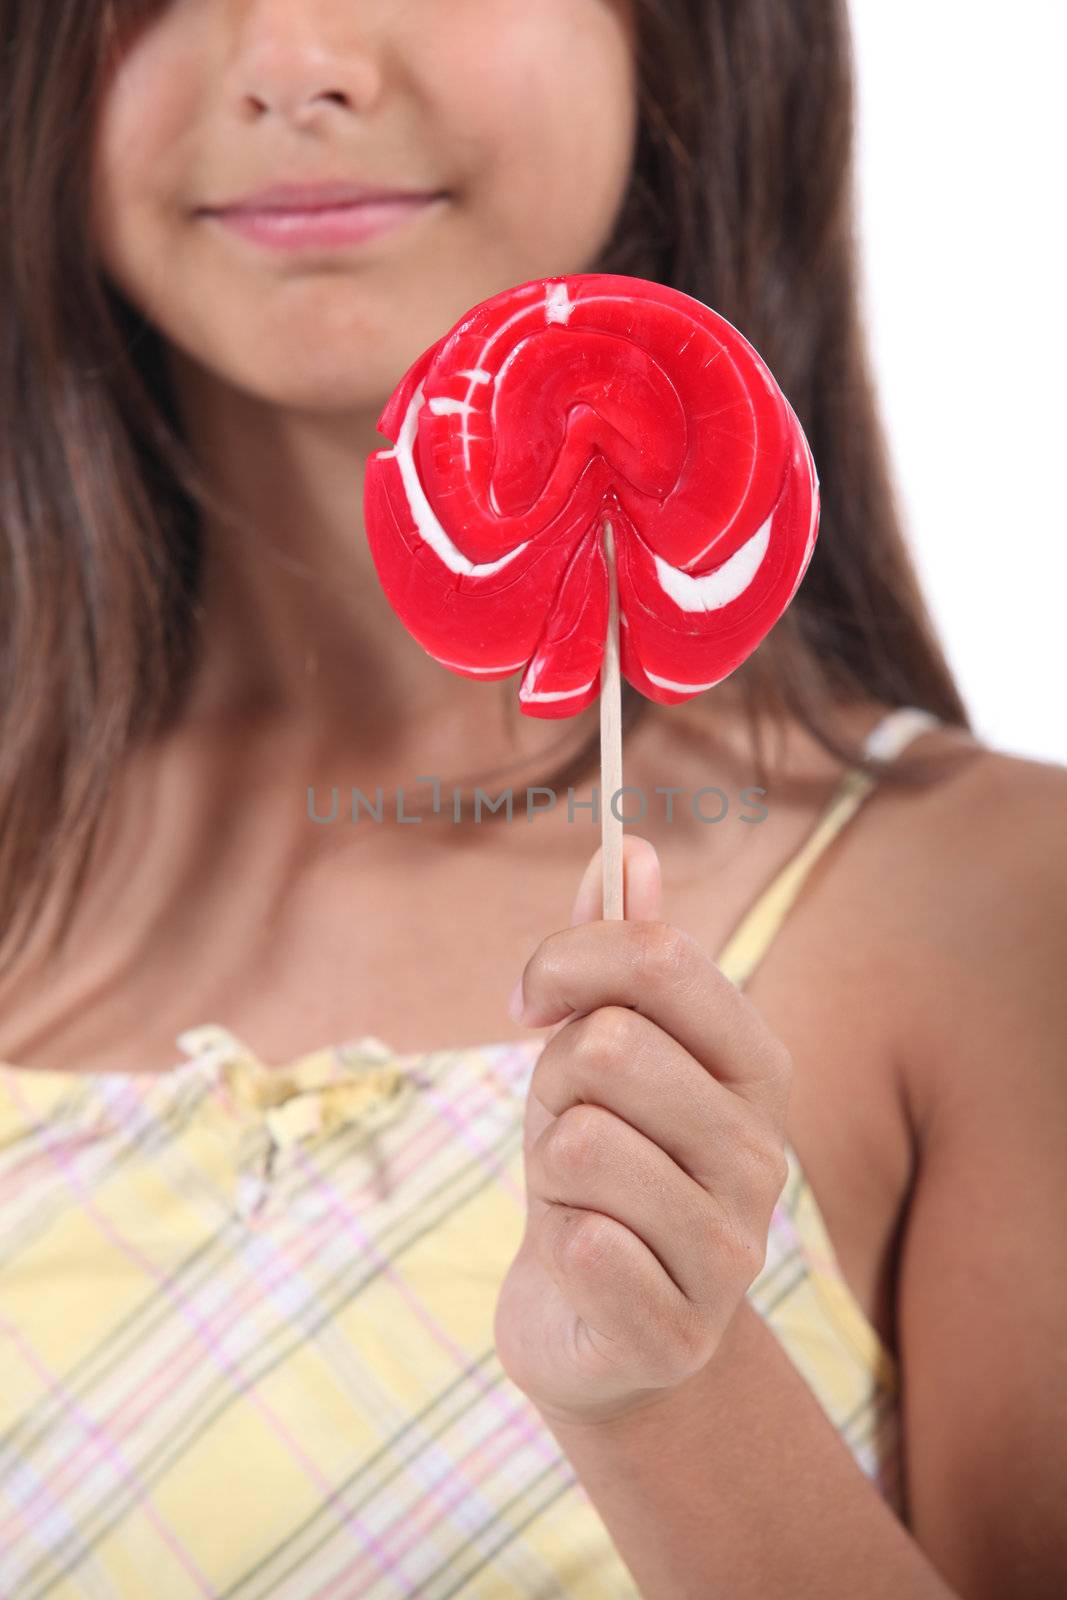 Girl holding a lolly pop by phovoir